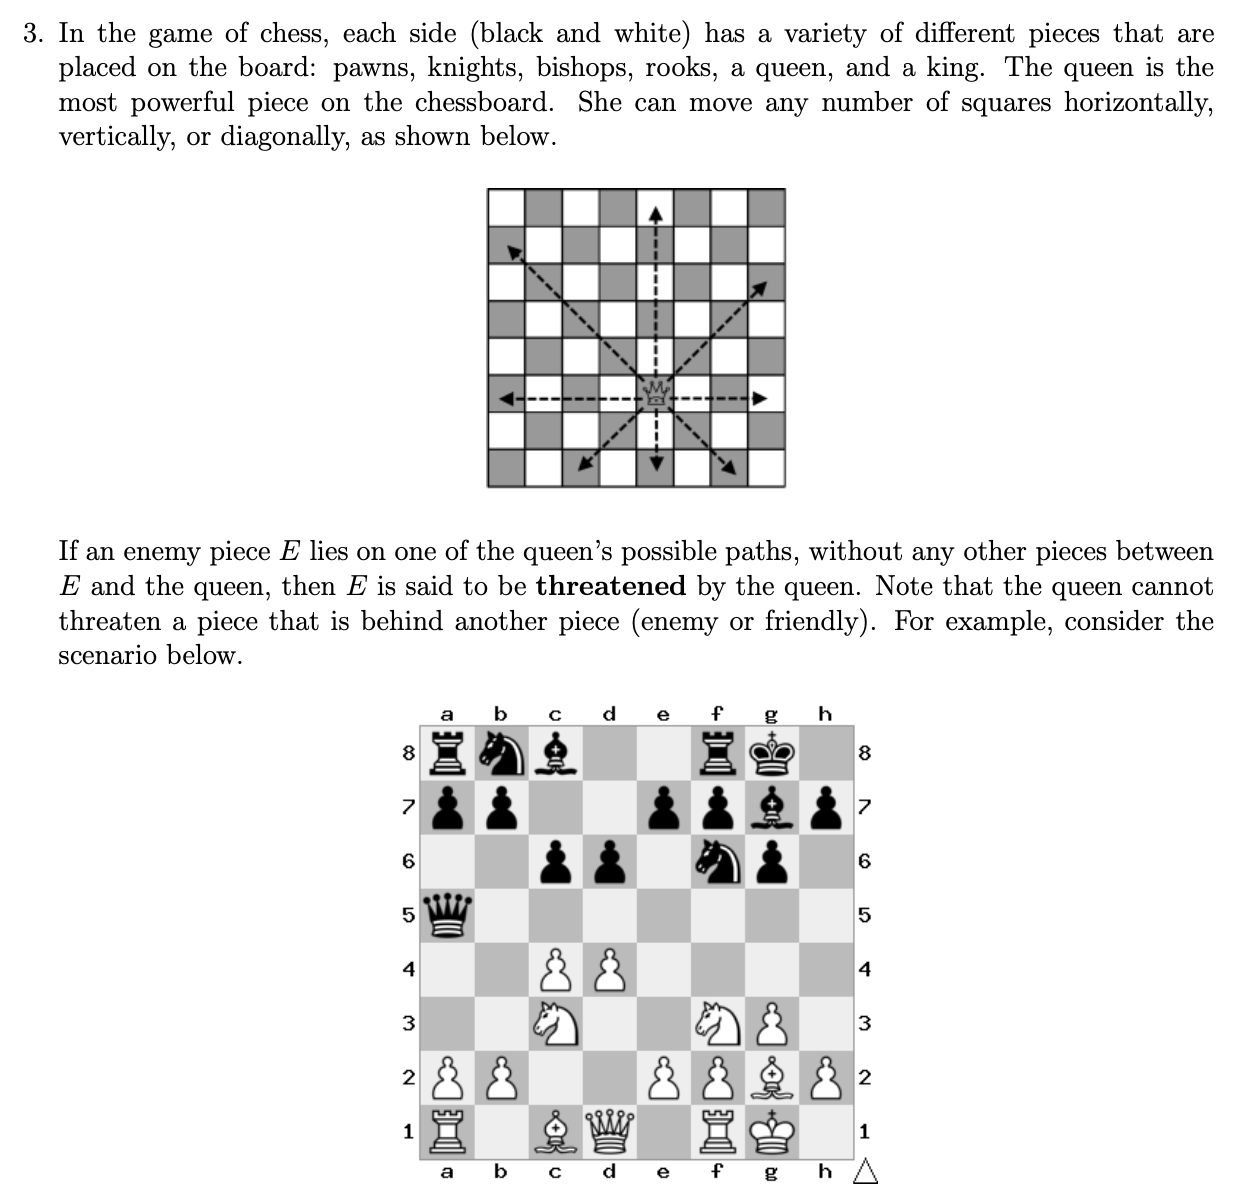 Within the first 3 or 4 moves of a chess game, is it better to play the  knights early or rather play pawns? - Quora